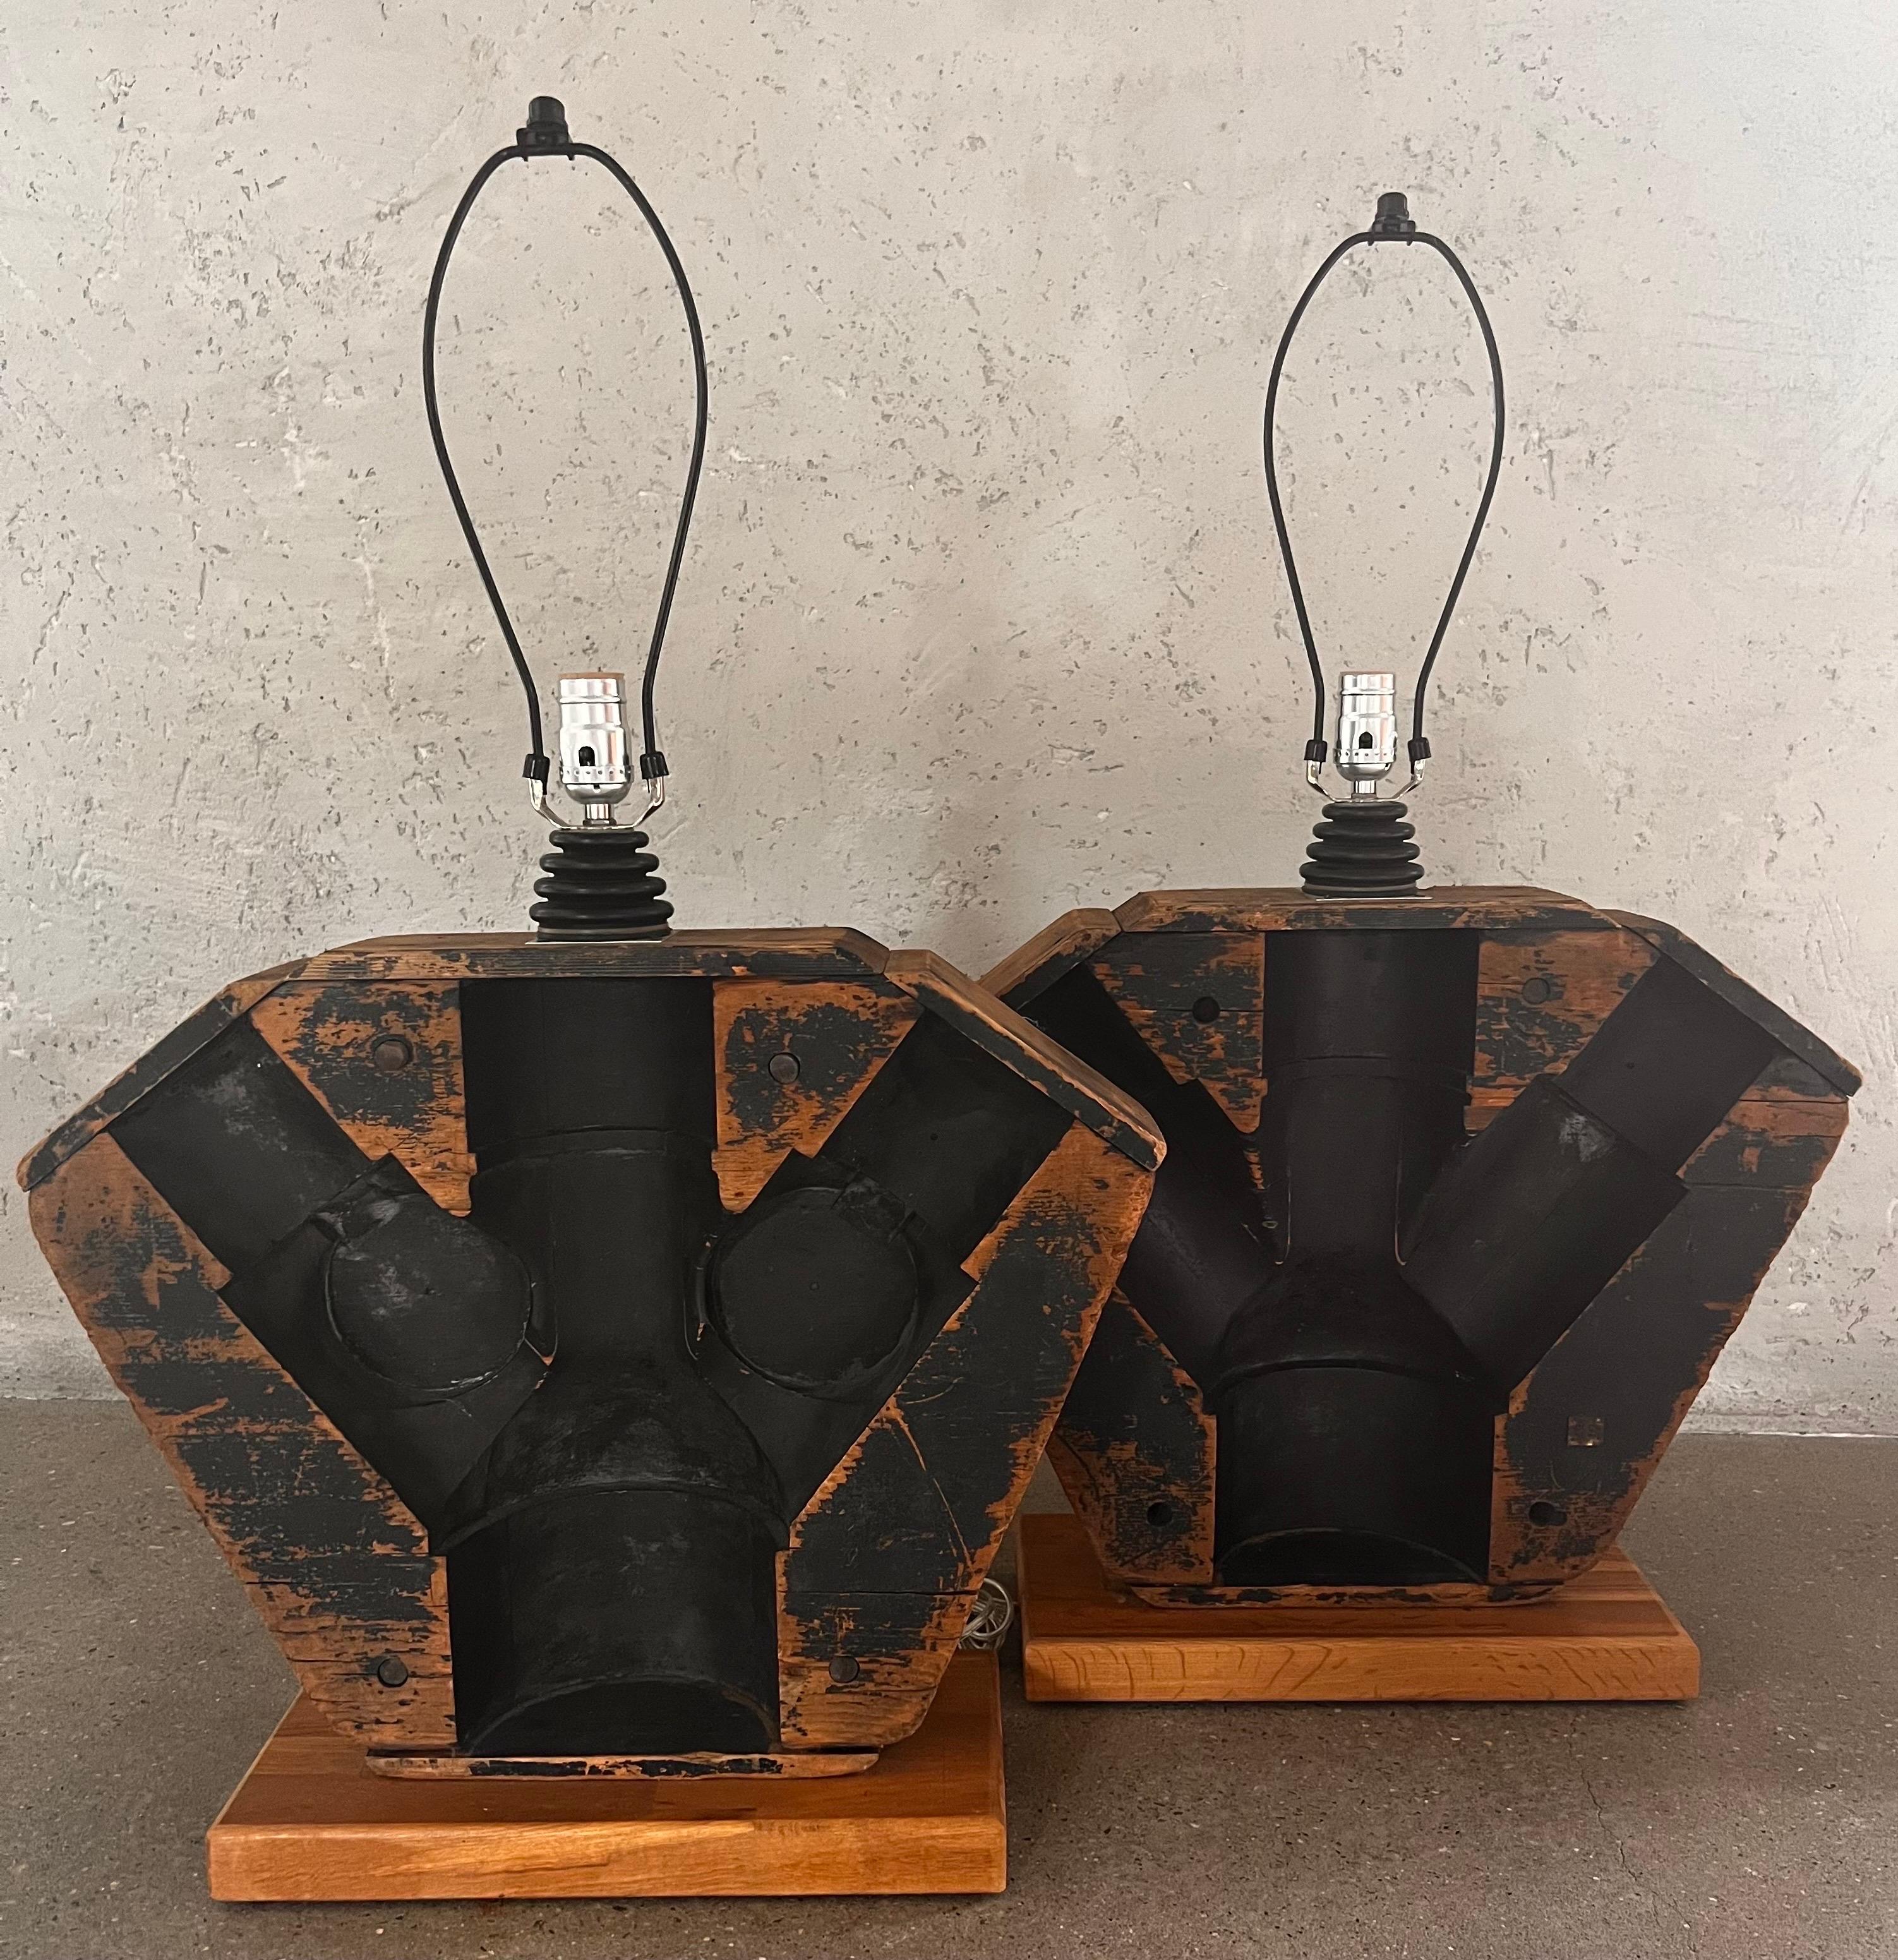 The gear lamps are massive and quite interesting. Black paint which appears to be India ink is very dark and works well against  the warm brown wood tones. Industrial and very chic. Black rectangular shades included. 